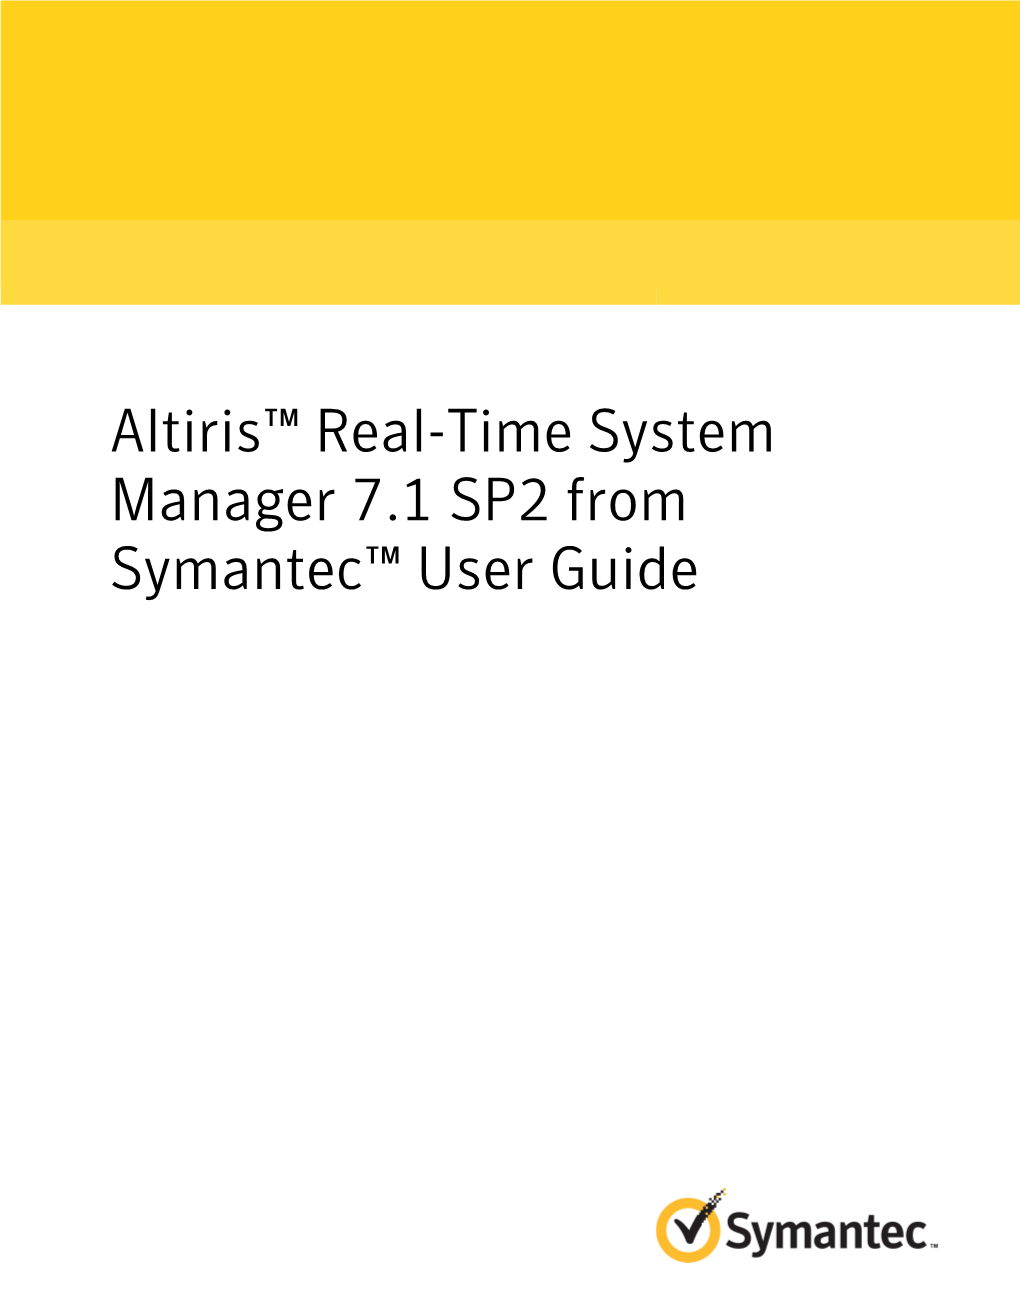 Altiris™ Real-Time System Manager 7.1 SP2 from Symantec™ User Guide Altiris™ Real-Time System Manager 7.1 SP2 from Symantec™ User Guide